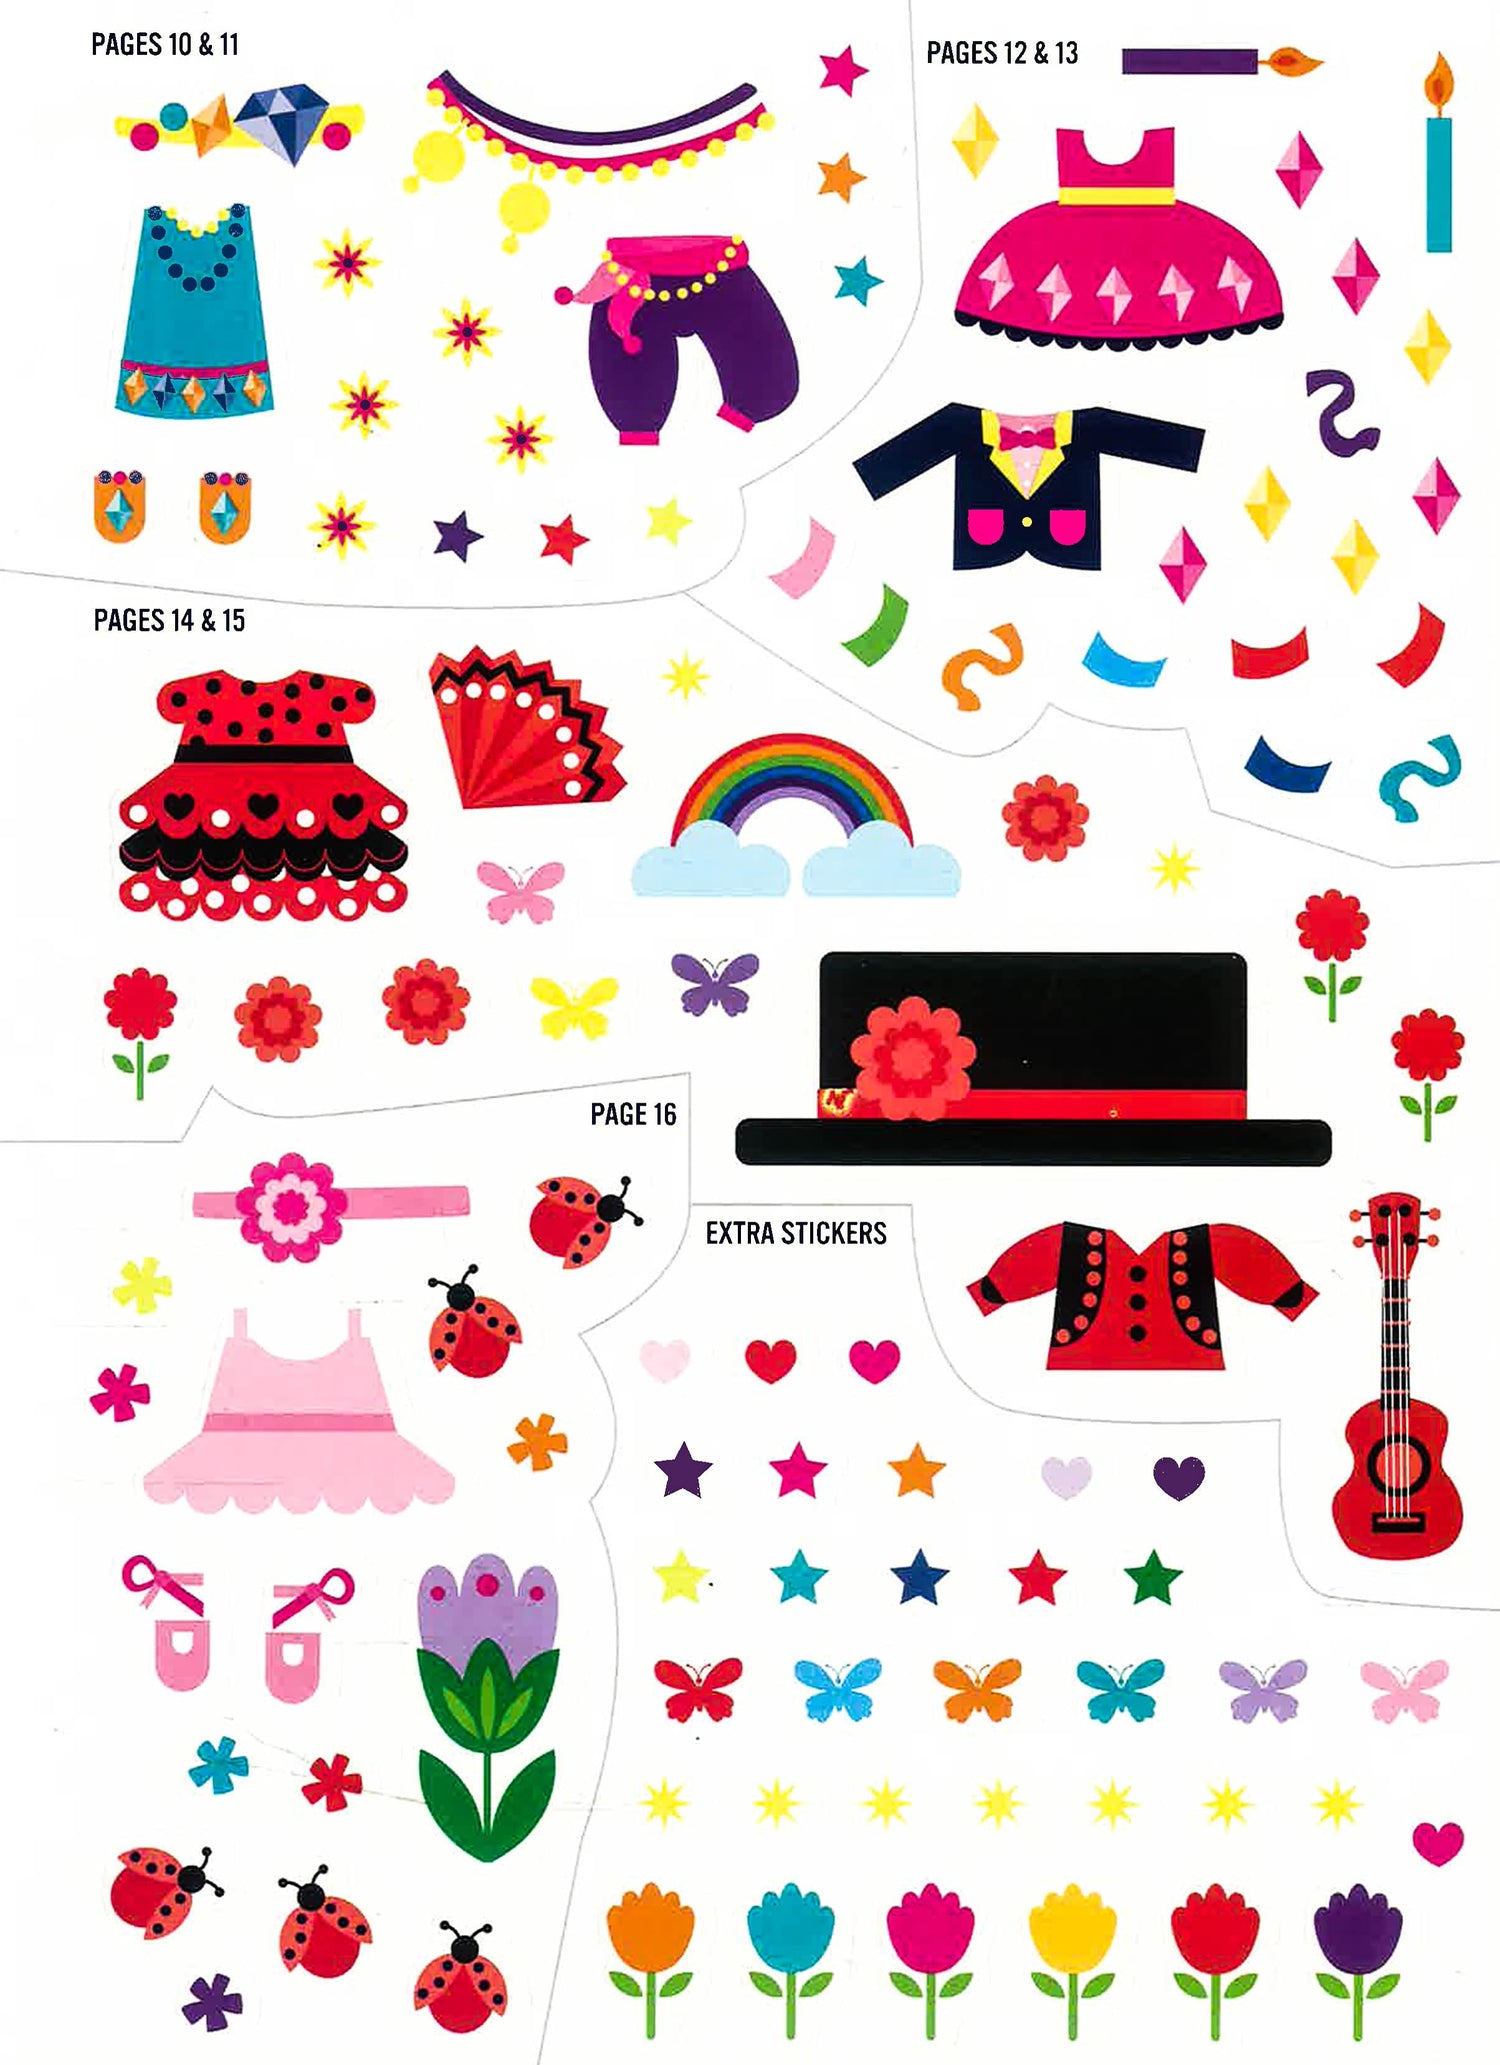 Hello Kitty Let's Play Dress-Up! Sticker, Coloring & Activity Book